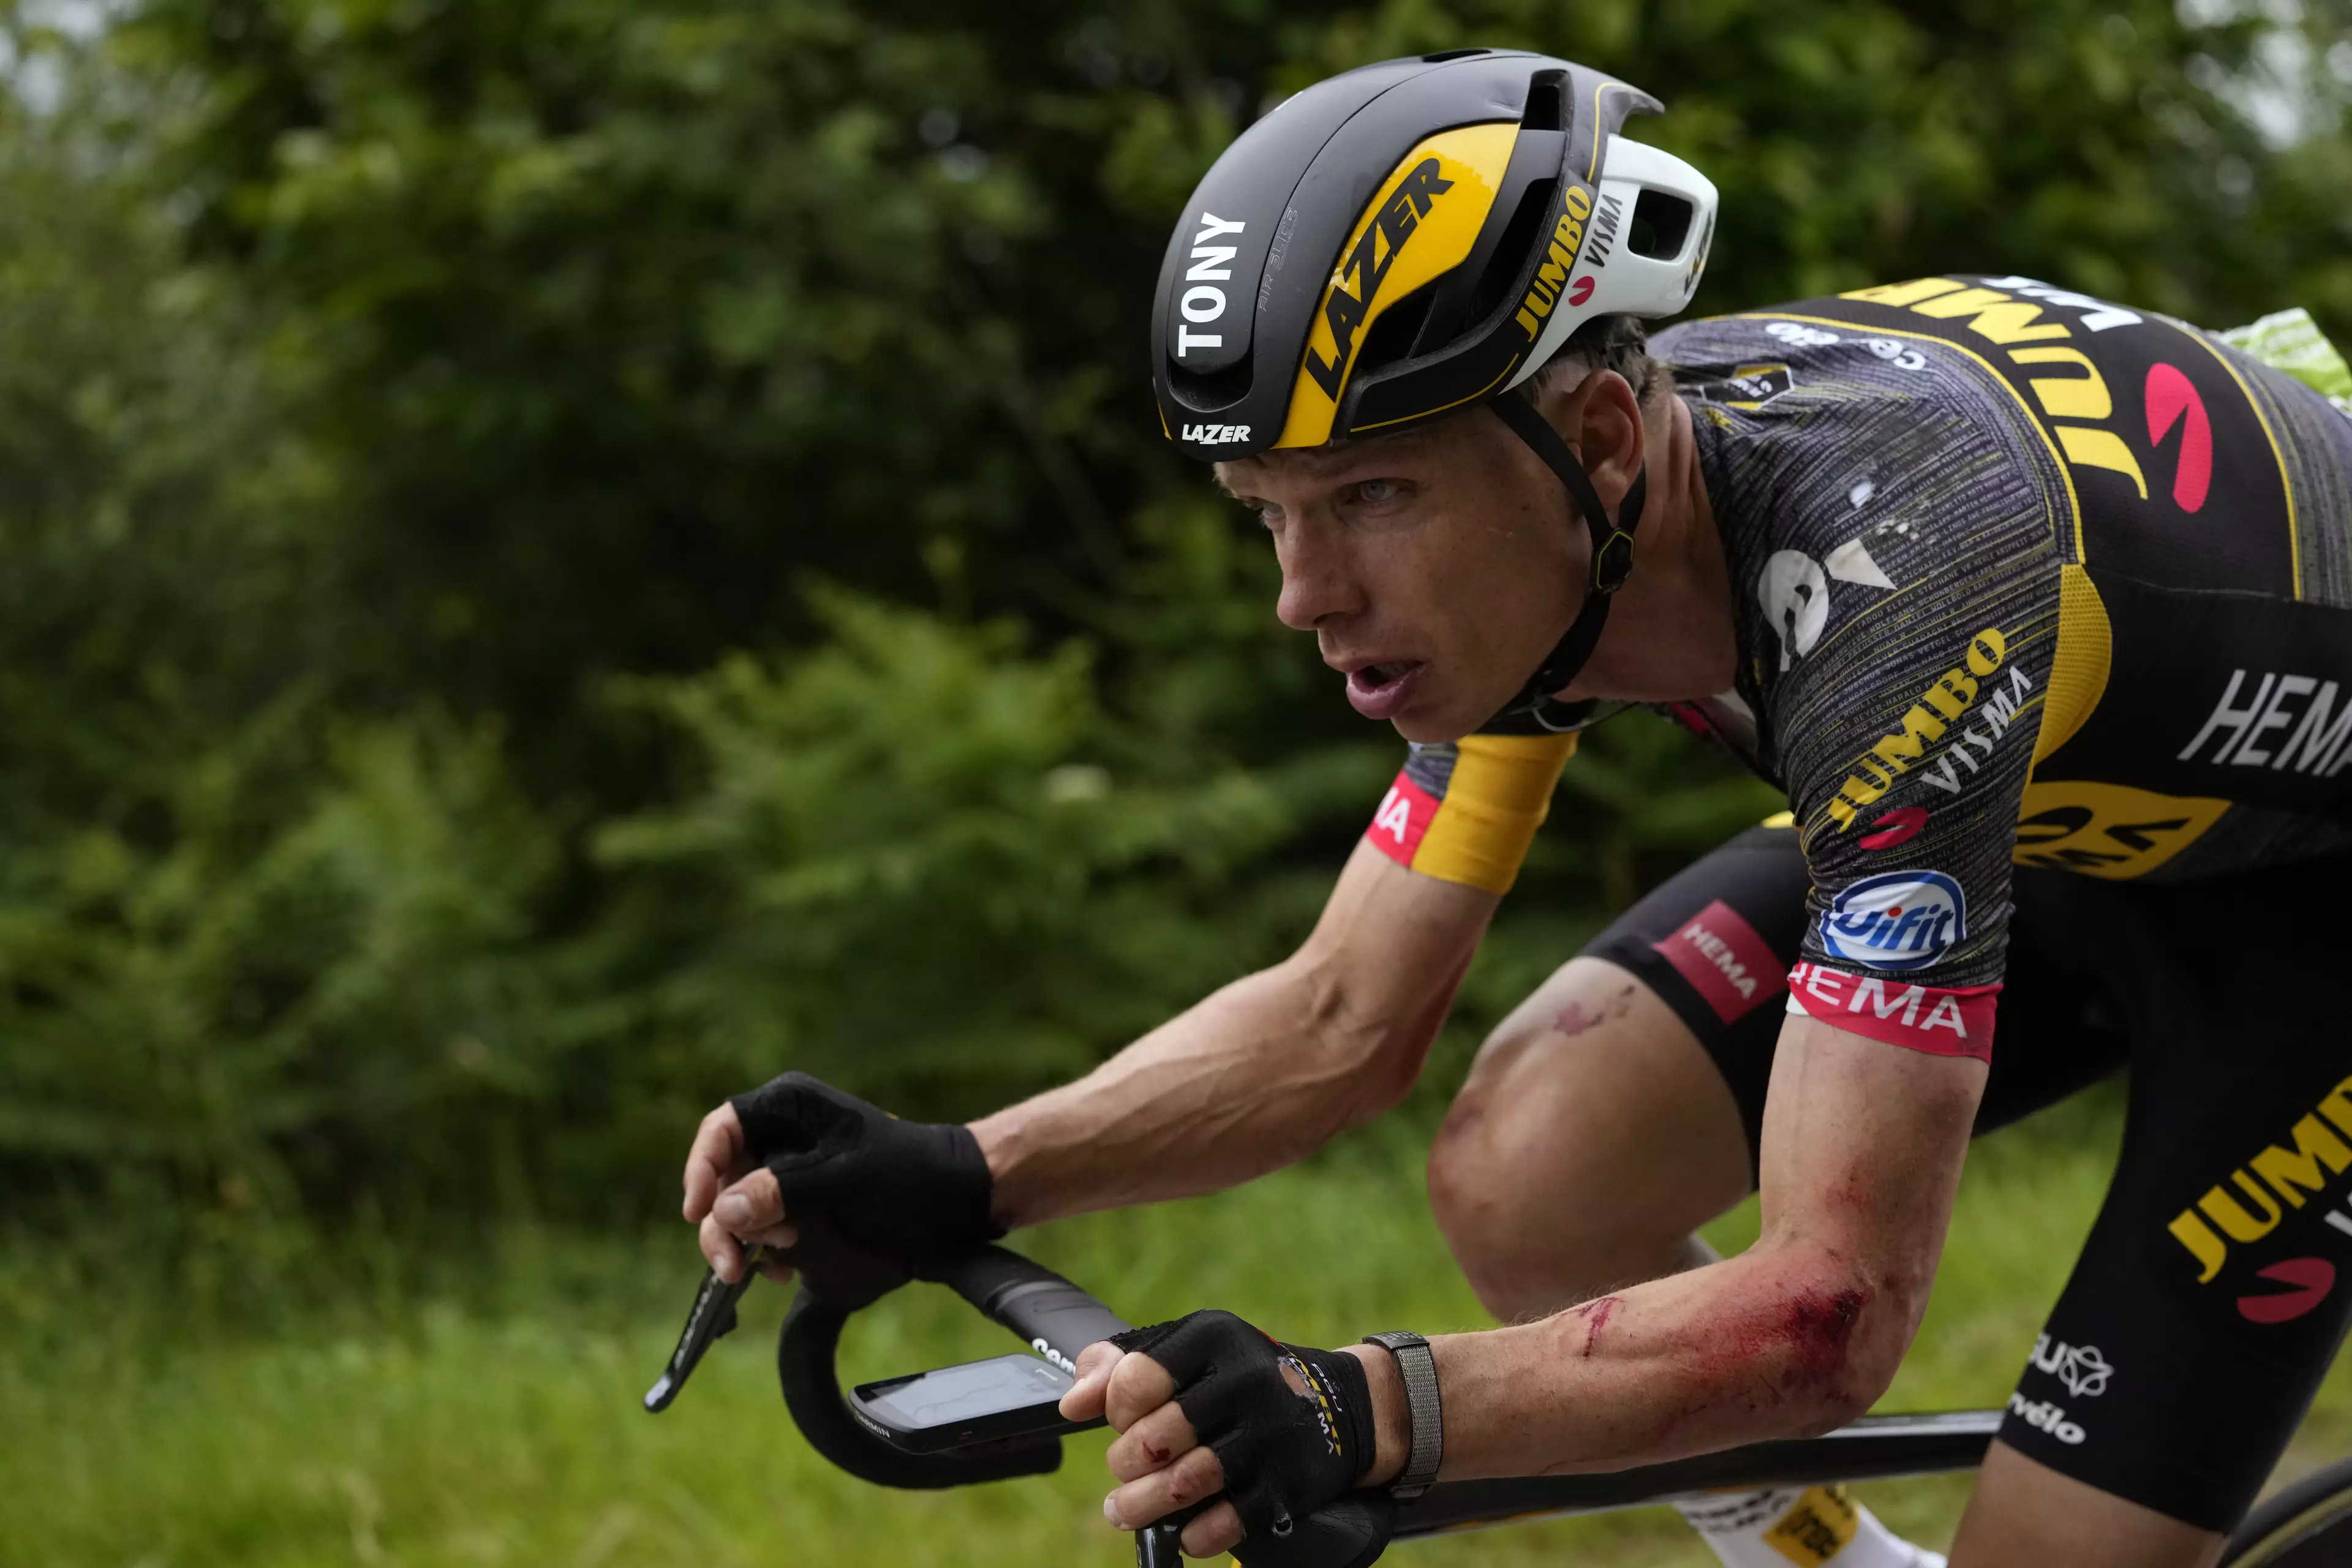 German cyclist Tony Martin rides with injuries to his arm after the incident.